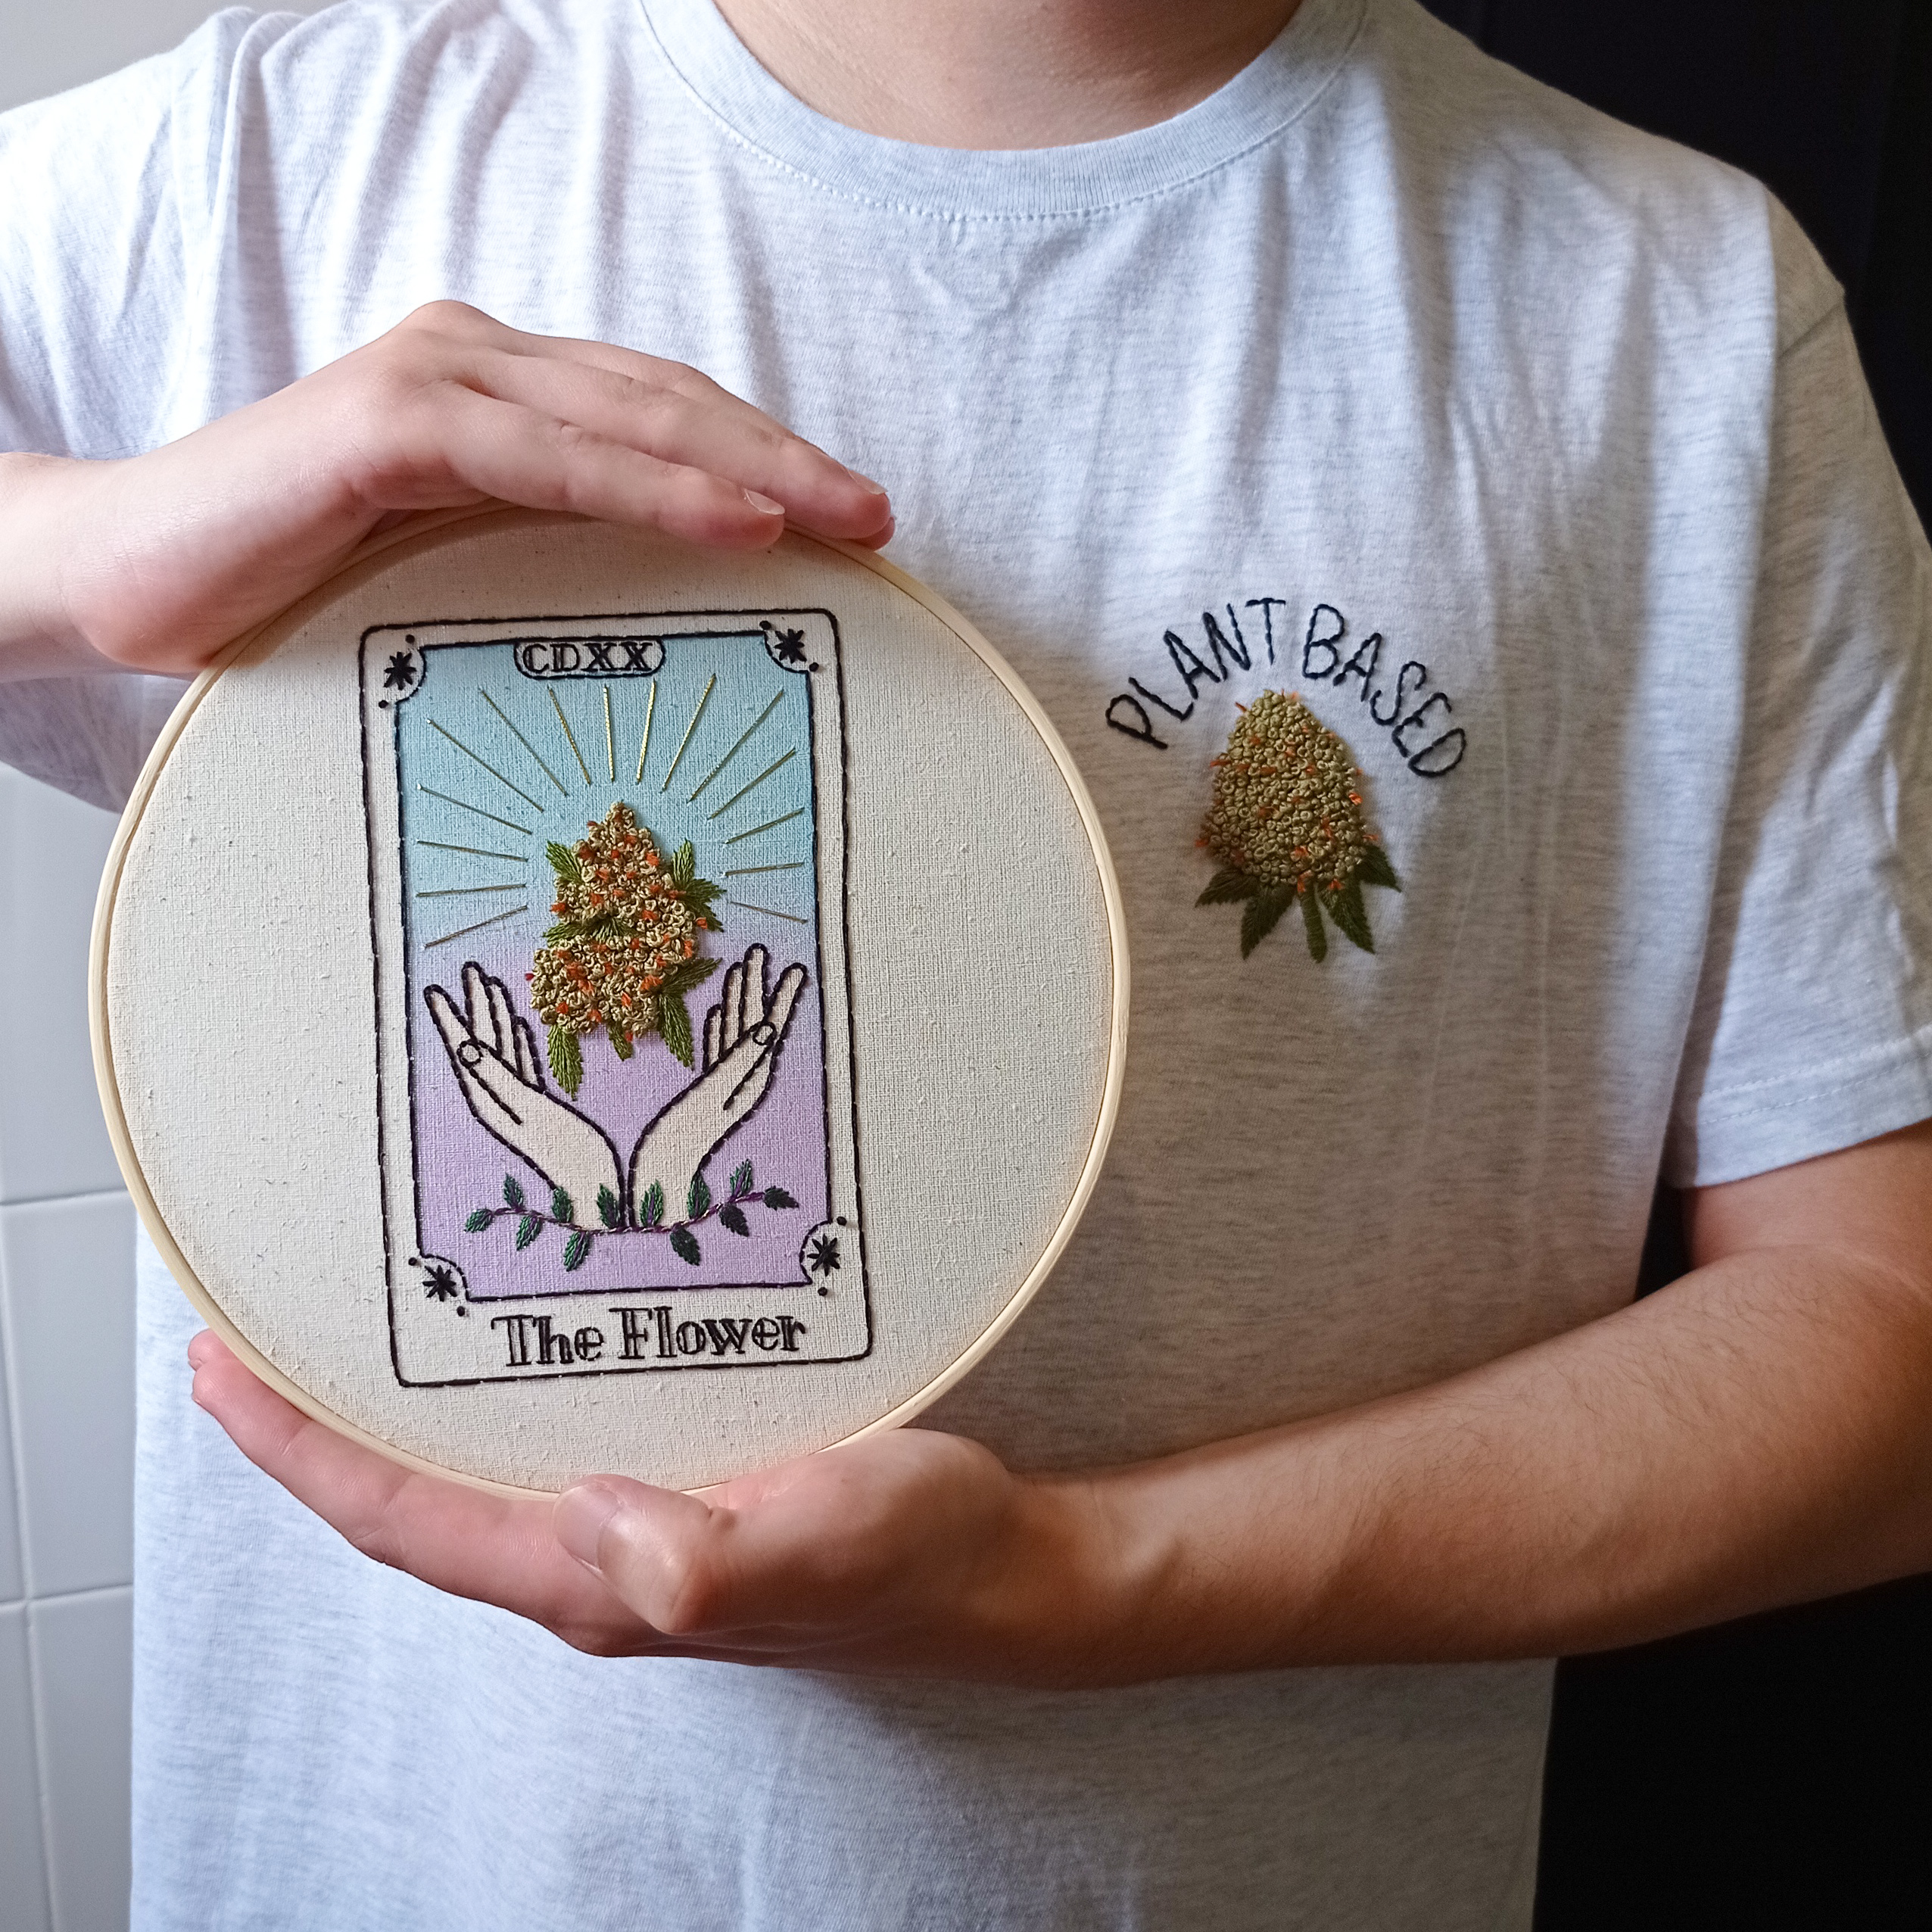 I’m a textile artist, and I have been hand-stitching some 3D Vegetation!